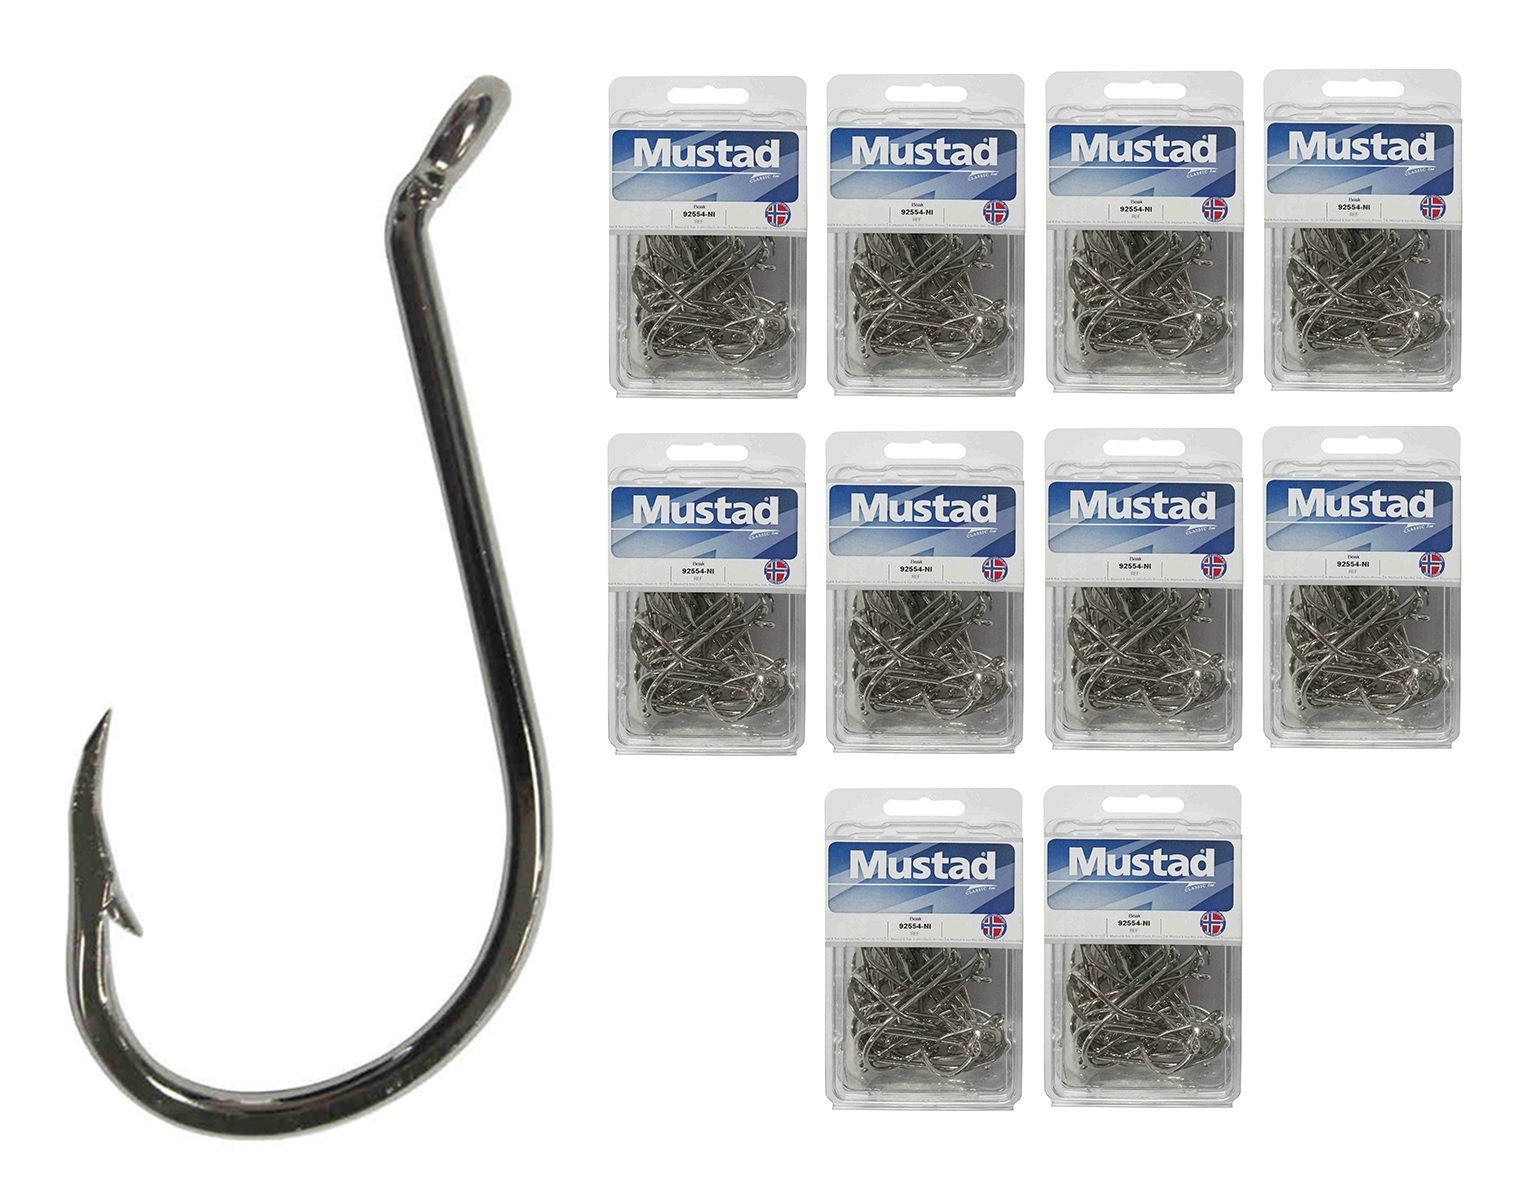 10 Boxes of 92554 2x Strong Nickle Plated Octopus Fishing Hooks